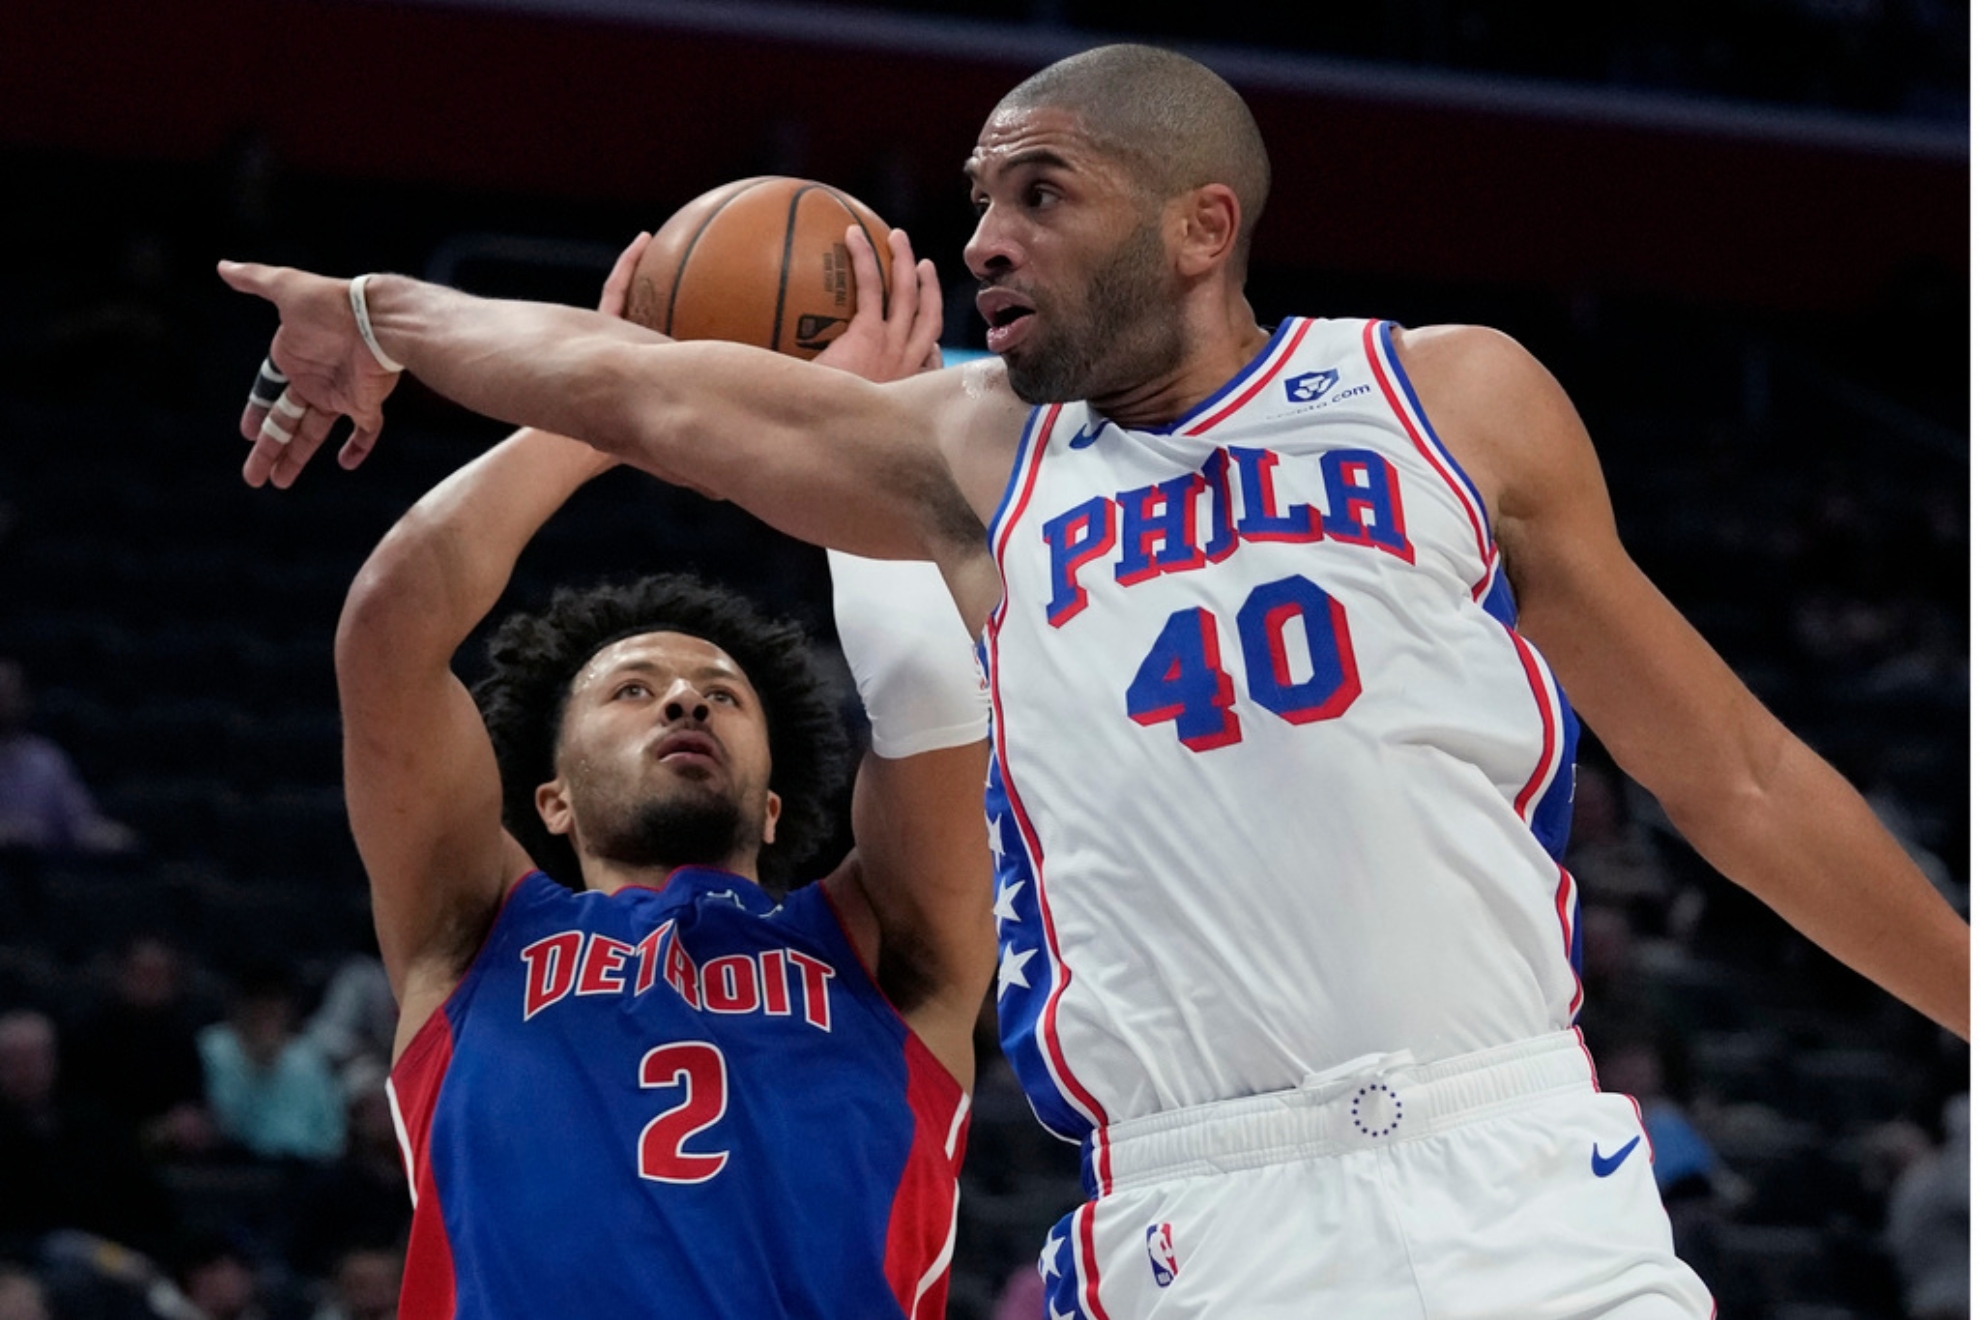 Detroit Pistons guard Cade Cunningham (2) shoots over the defense of Philadelphia 76ers forward Nicolas Batum (40) during the first half of an NBA basketball game, Wednesday, Dec. 13, 2023, in Detroit. (AP Photo/Carlos Osorio)